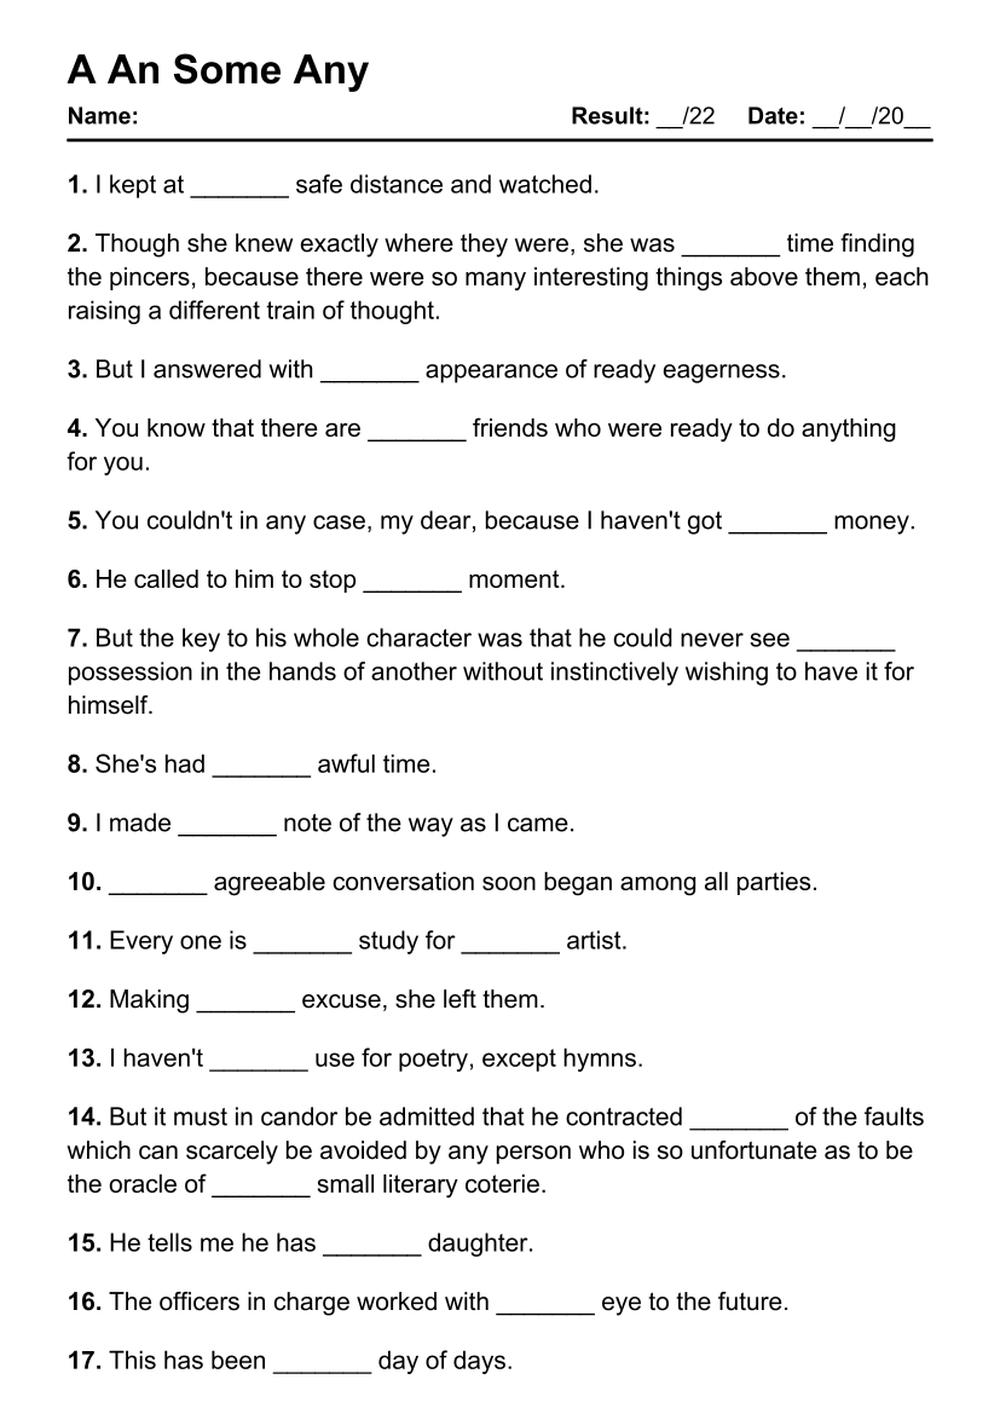 Printable A An Some Any Exercises - PDF Worksheet with Answers - Test 82